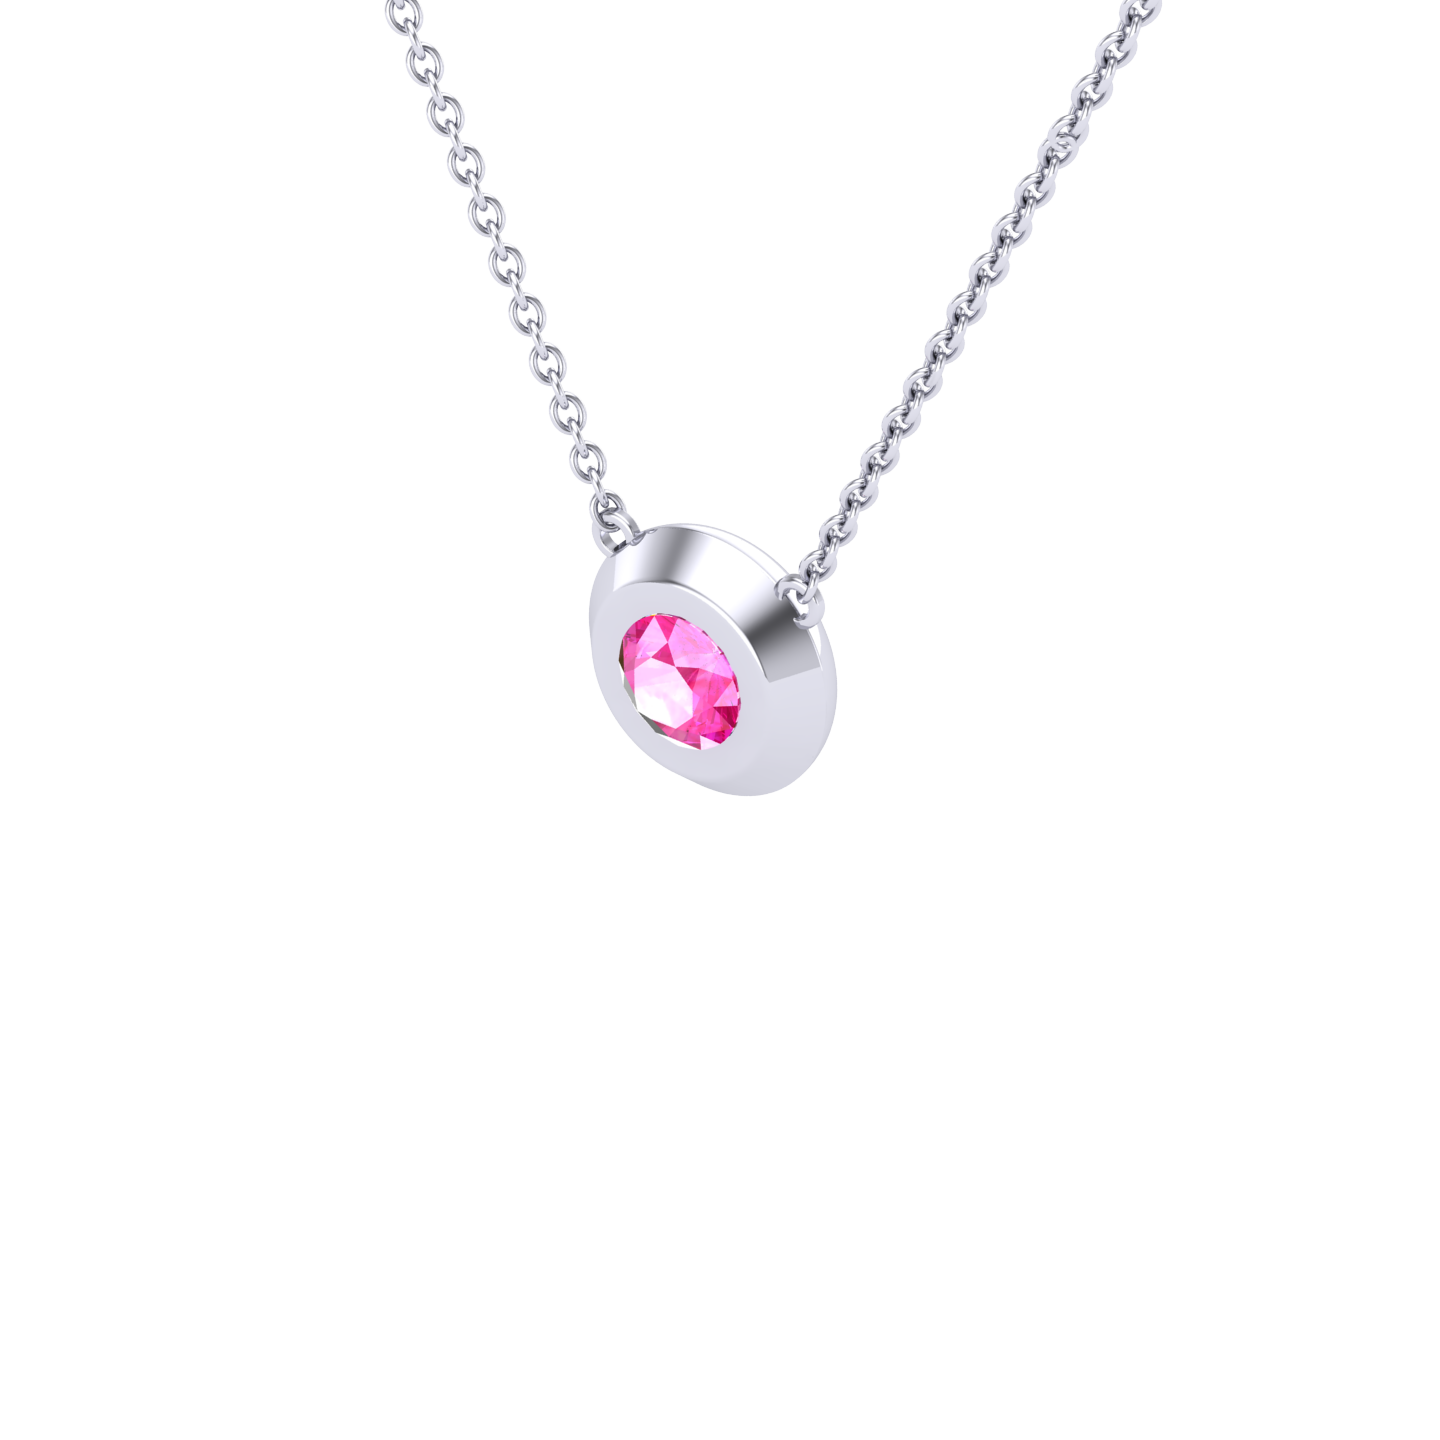 ChicSilver Women 925 Sterling Silver Cat Necklace October Birthstone Jewelry  Tourmaline Pendant Necklace Birthday Gift for Cat Lovers - Walmart.com